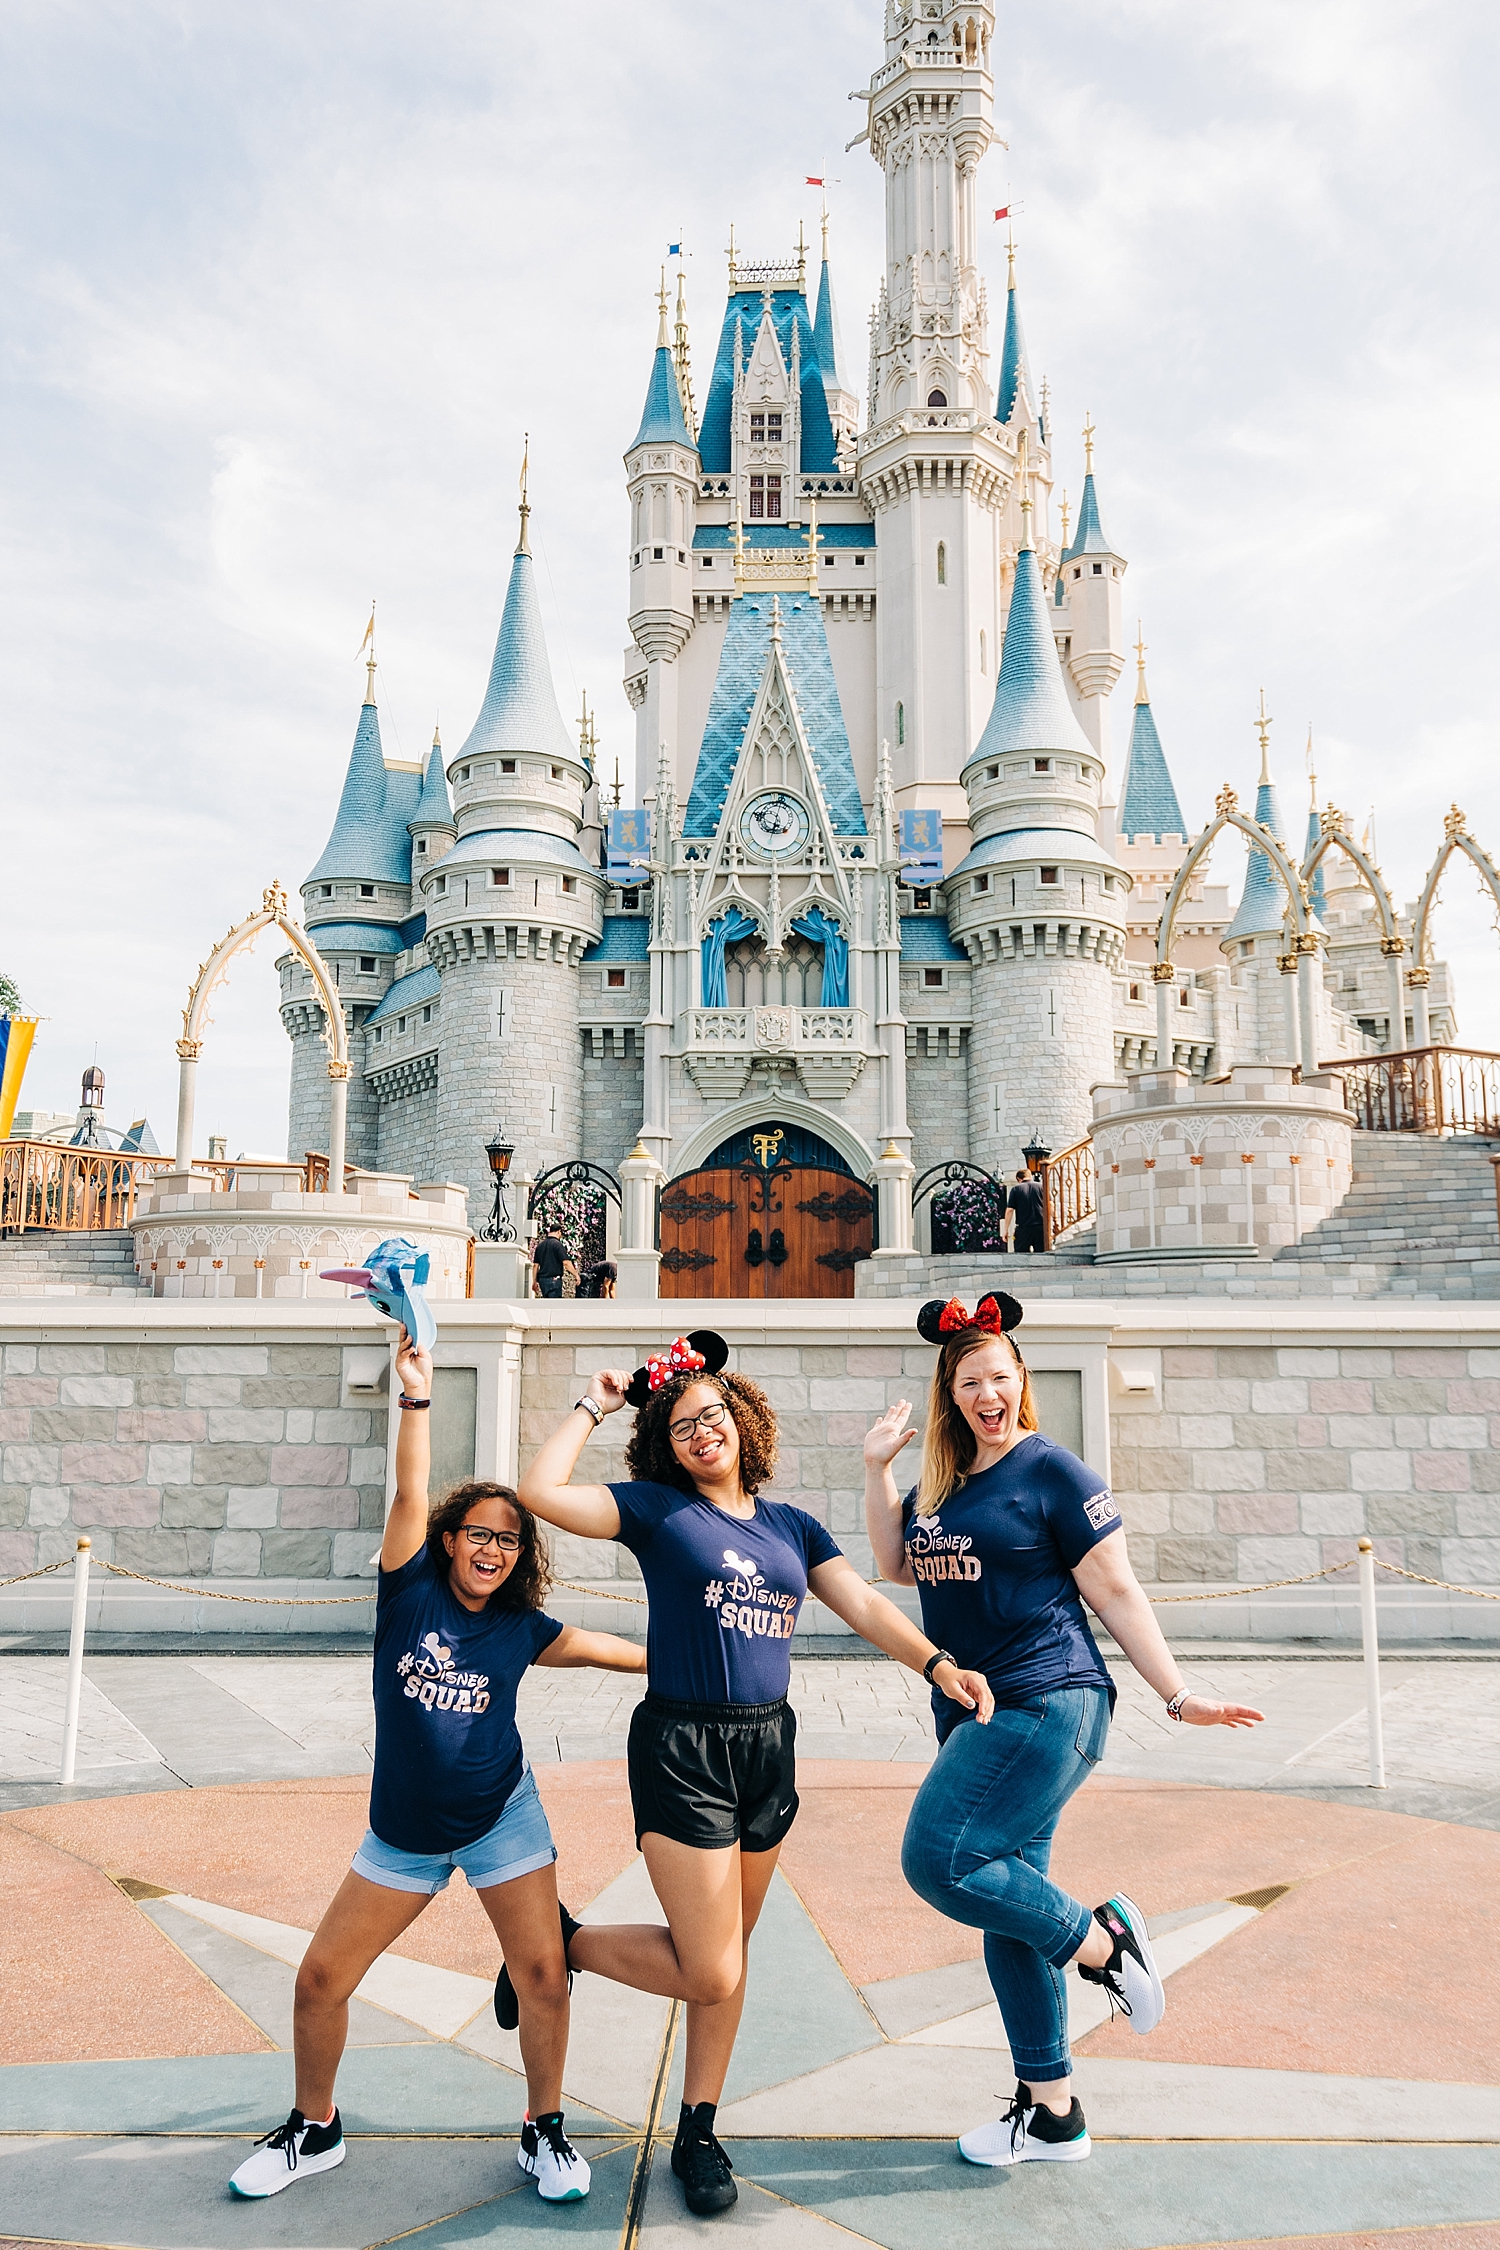 Mother and daughters strike instagram worthy pose in front of Cinderella’s castle